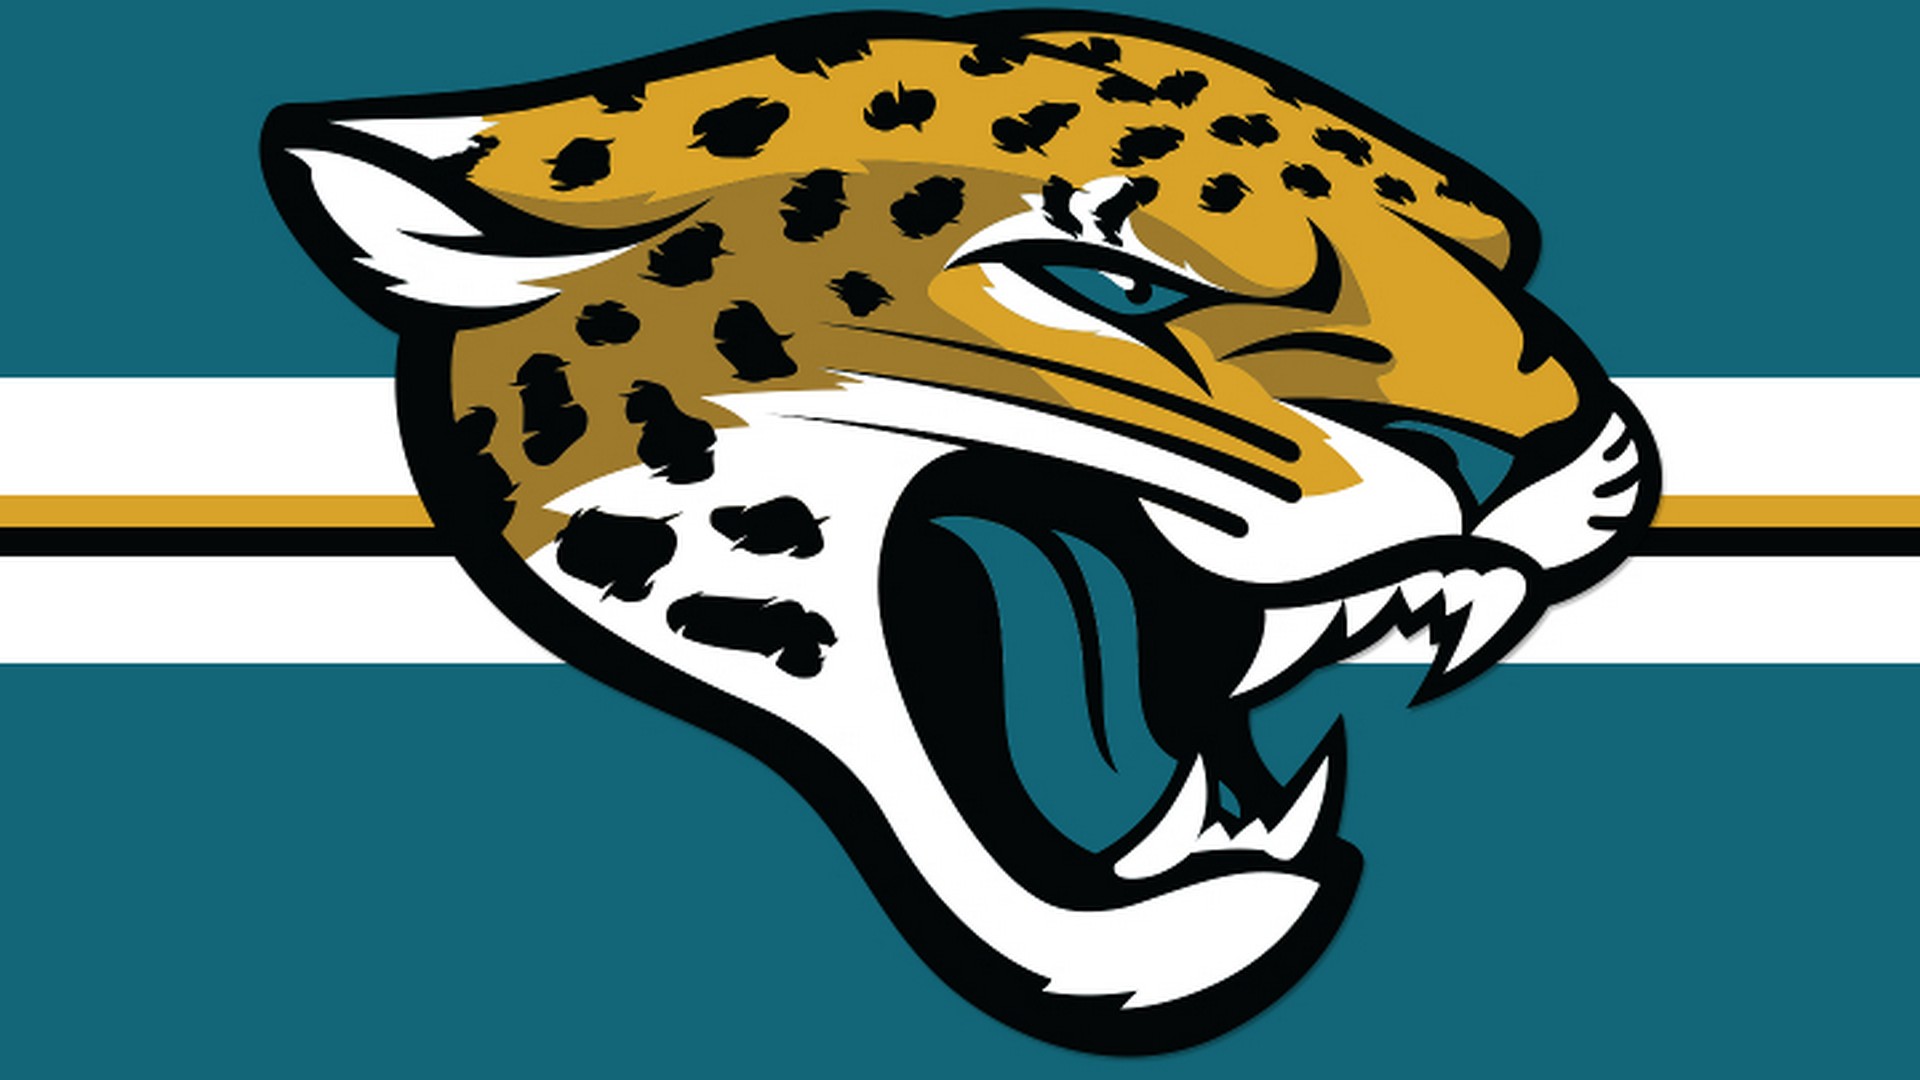 Wallpapers Jacksonville Jaguars with resolution 1920x1080 pixel. You can make this wallpaper for your Mac or Windows Desktop Background, iPhone, Android or Tablet and another Smartphone device